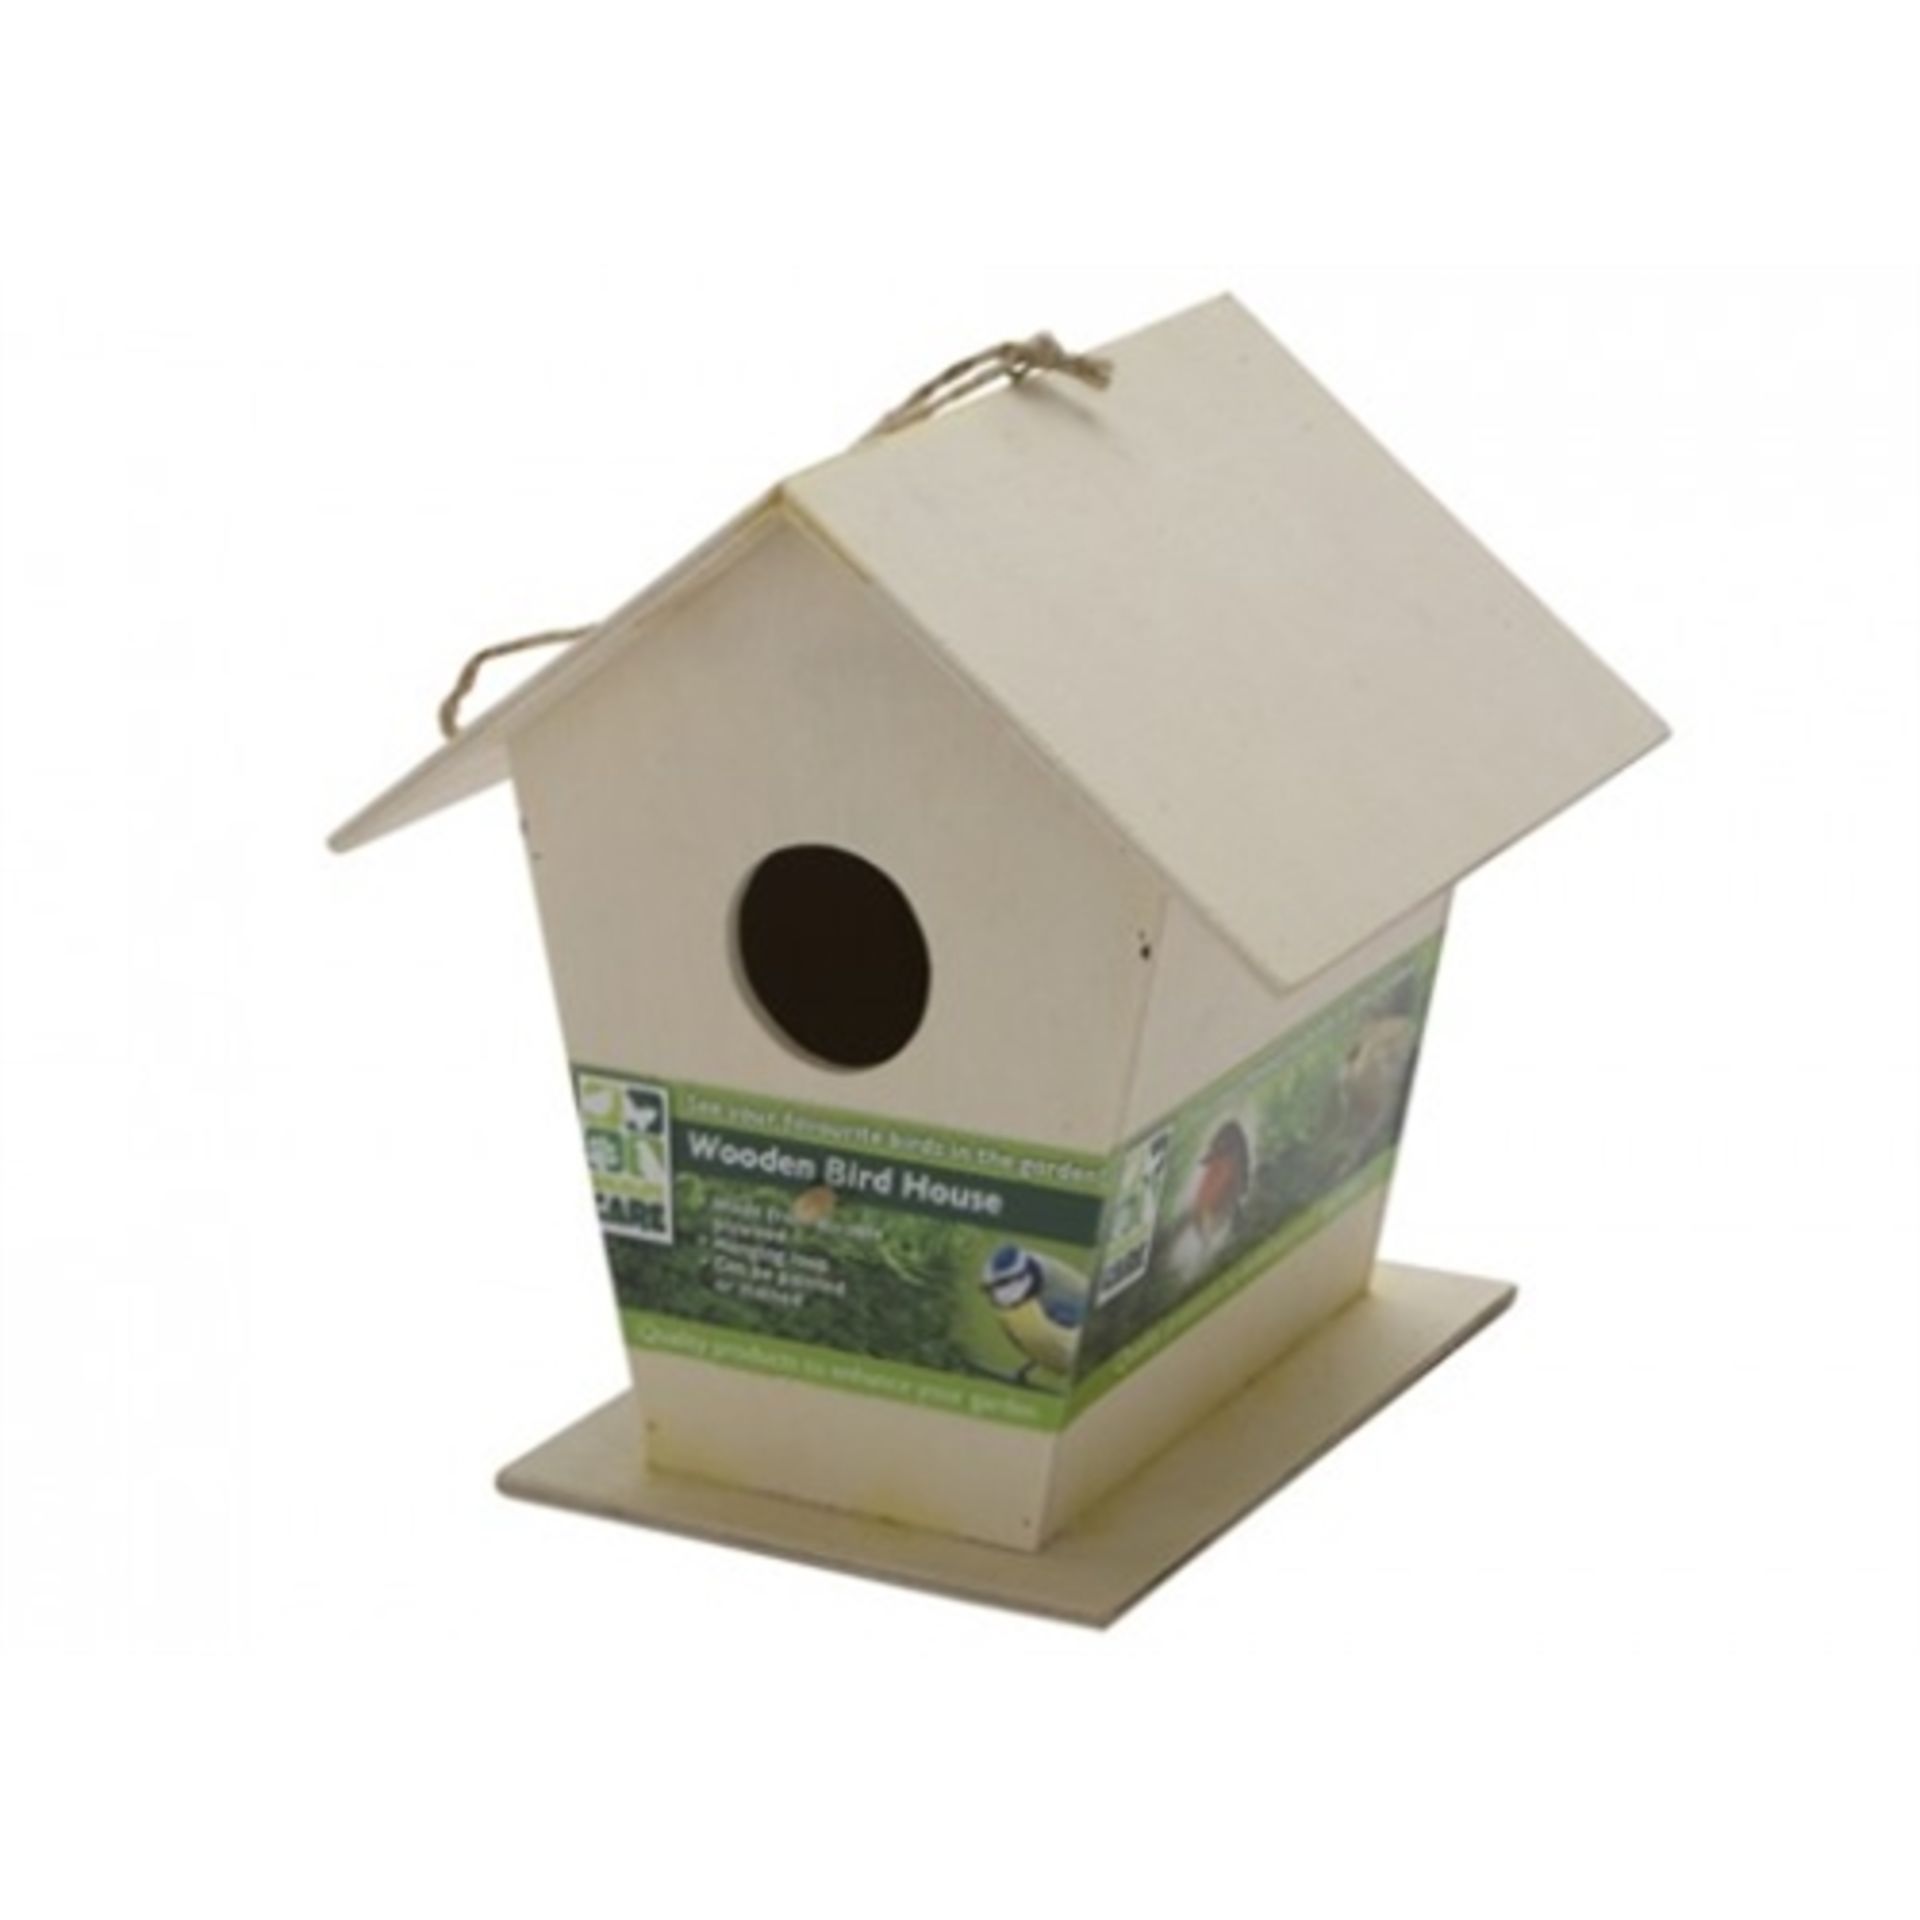 V Brand New Wooden Bird House 17 x 15cm X 2 Bid price to be multiplied by Two